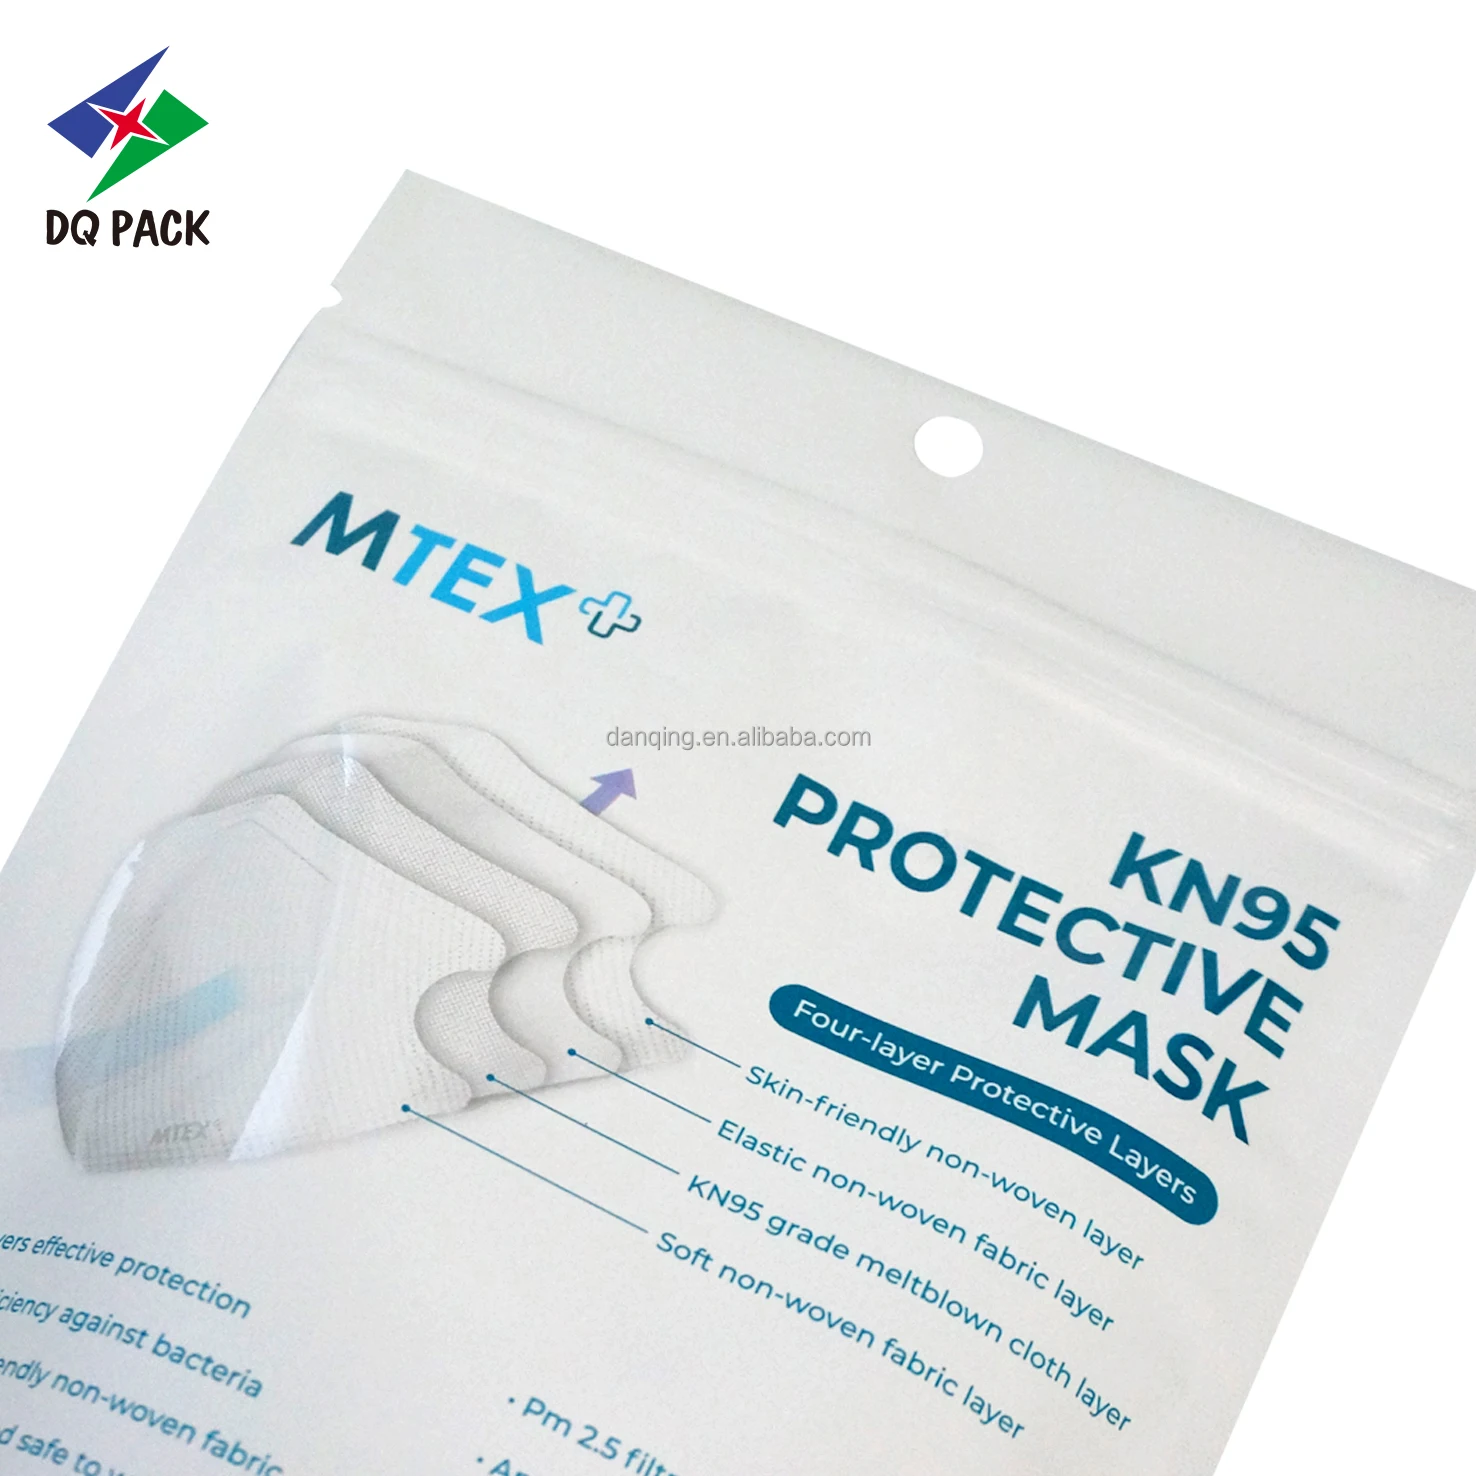 DQ PACK Hot Sale Protective Masking Plastic Packaging Bag With Window Manufacturer